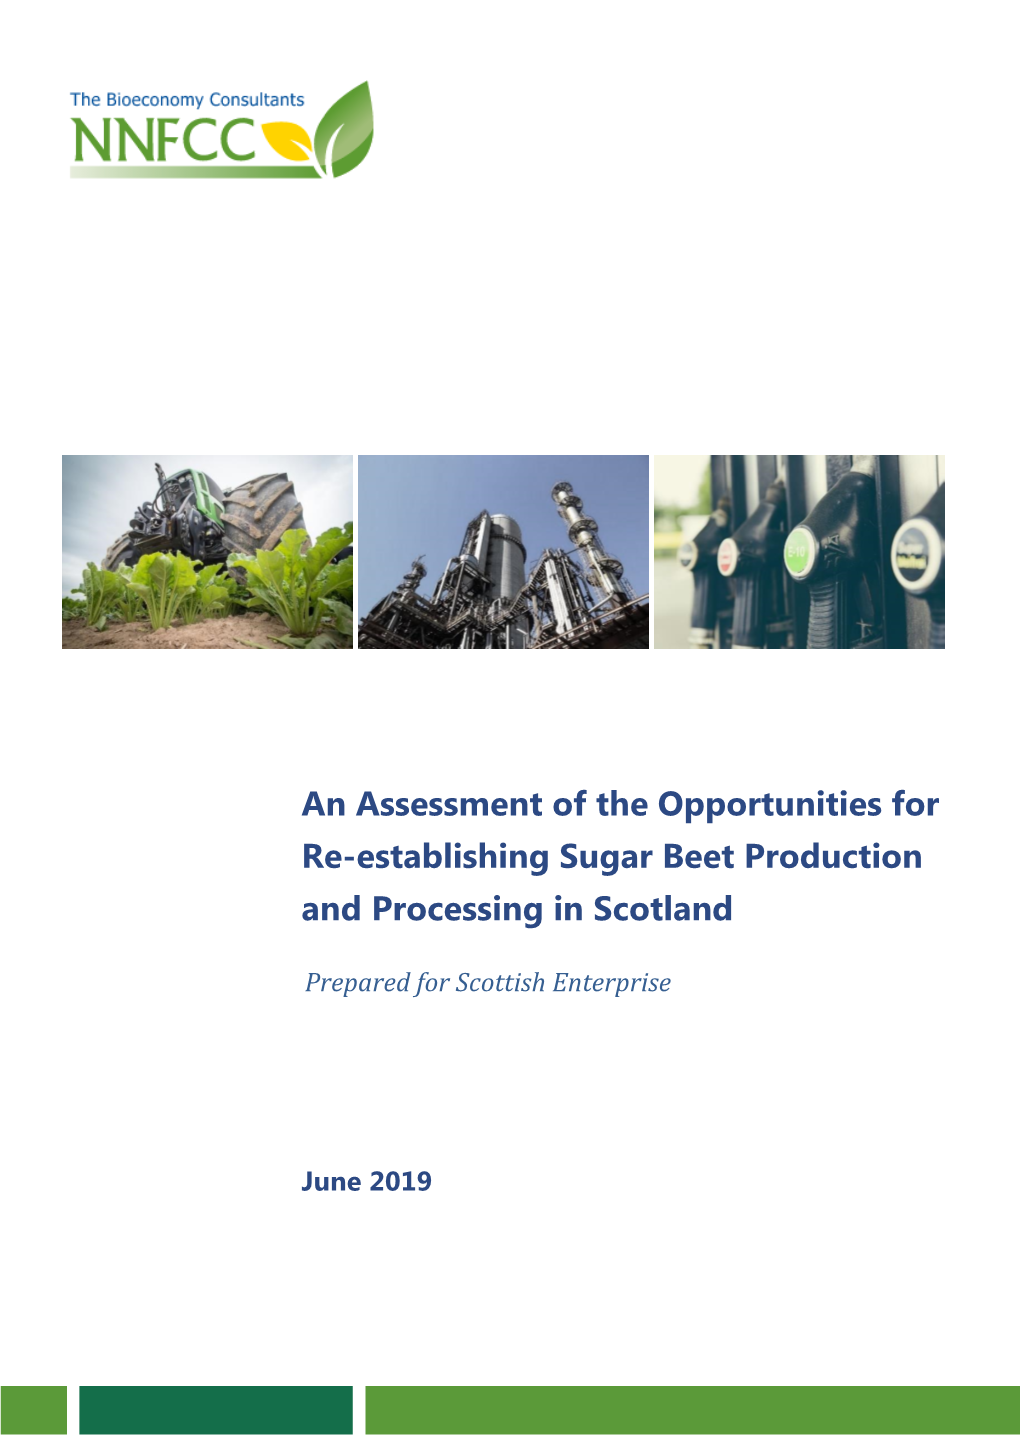 An Assessment of the Opportunities for Re-Establishing Sugar Beet Production and Processing in Scotland